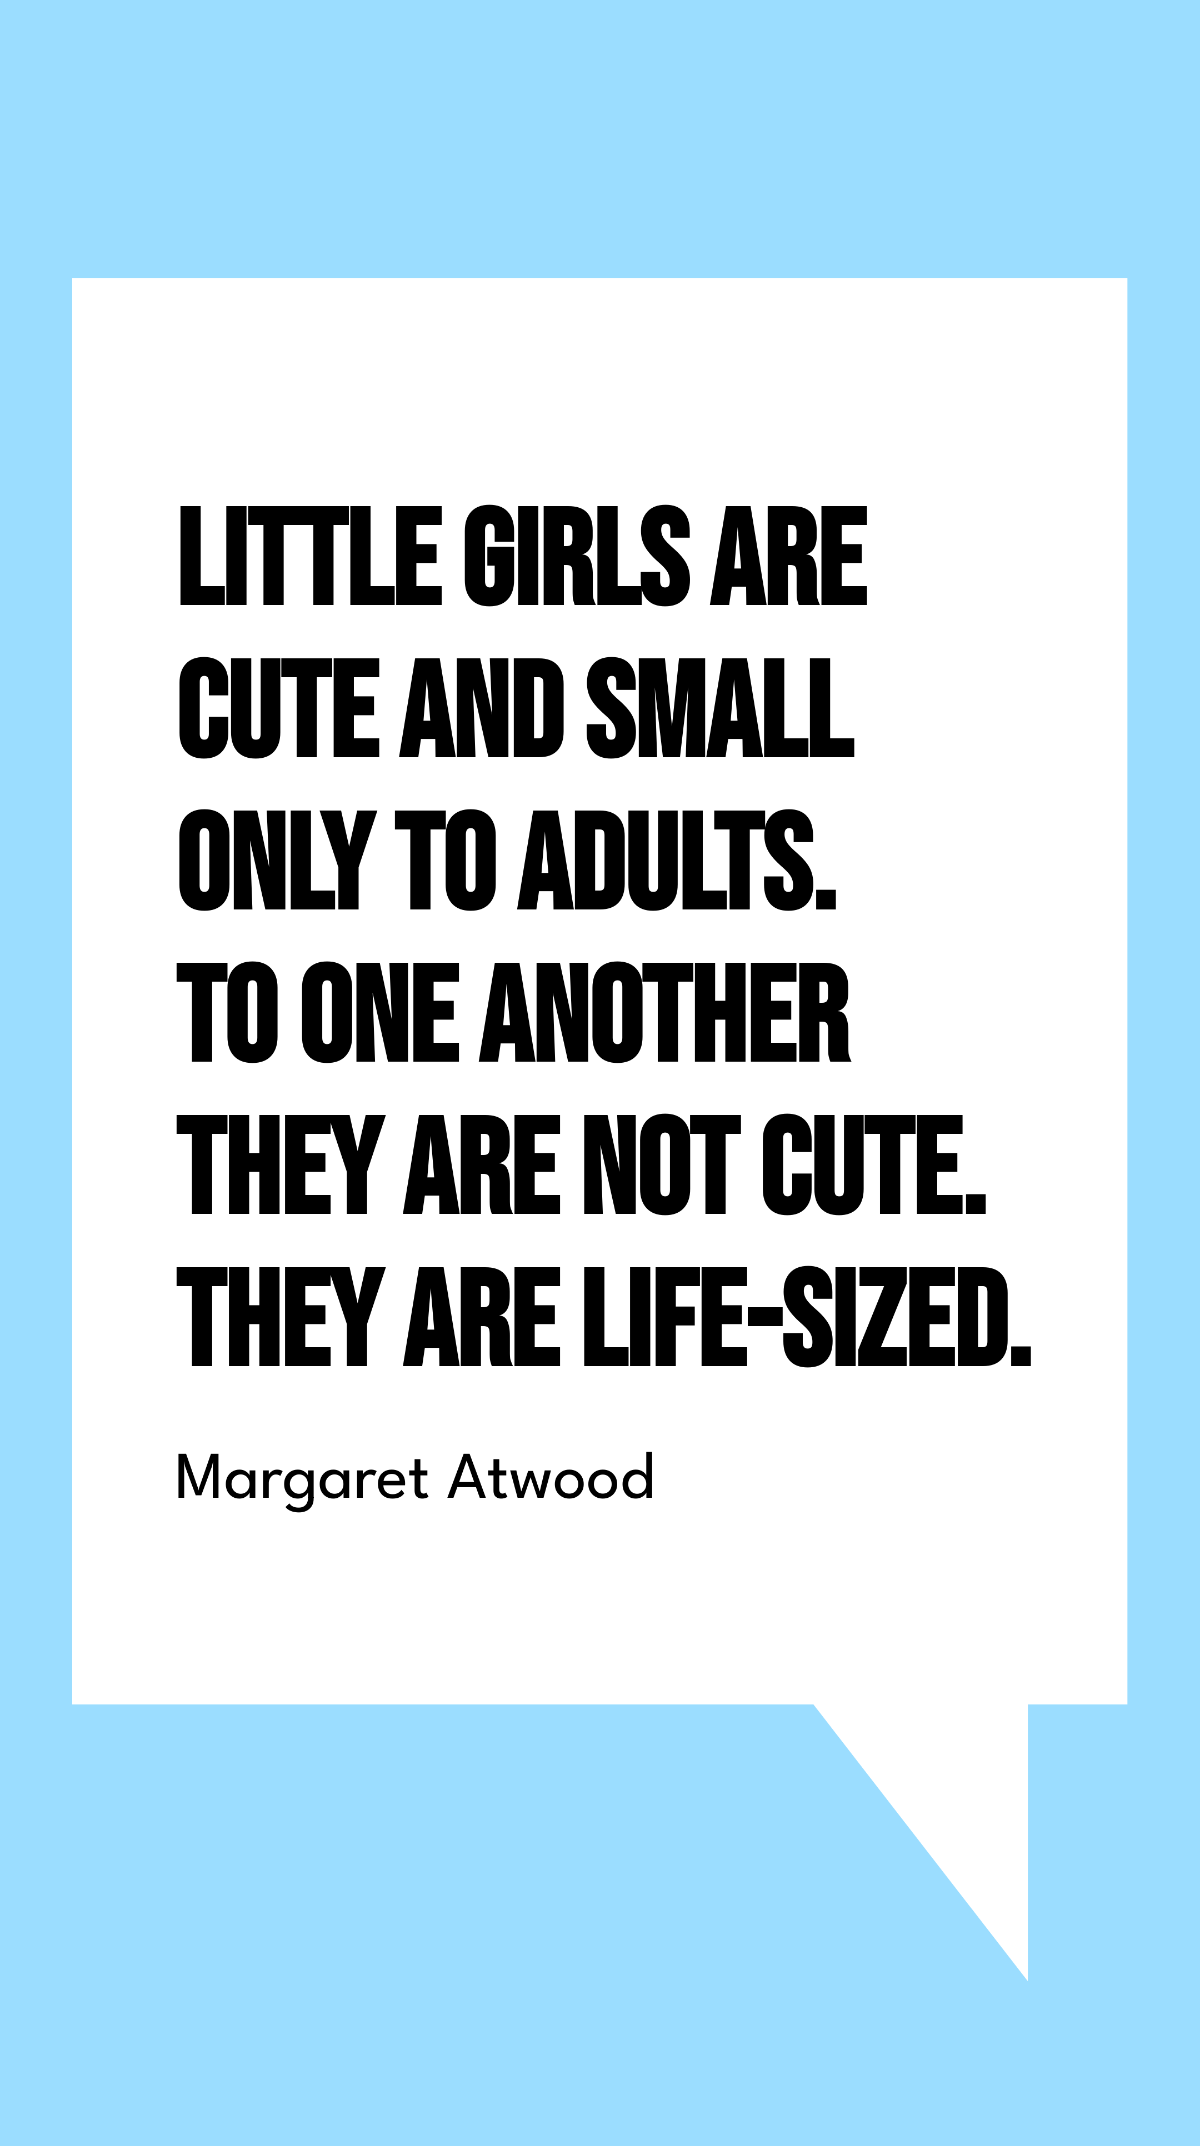 Margaret Atwood - Little girls are cute and small only to adults. To one another they are not cute. They are life-sized. Template